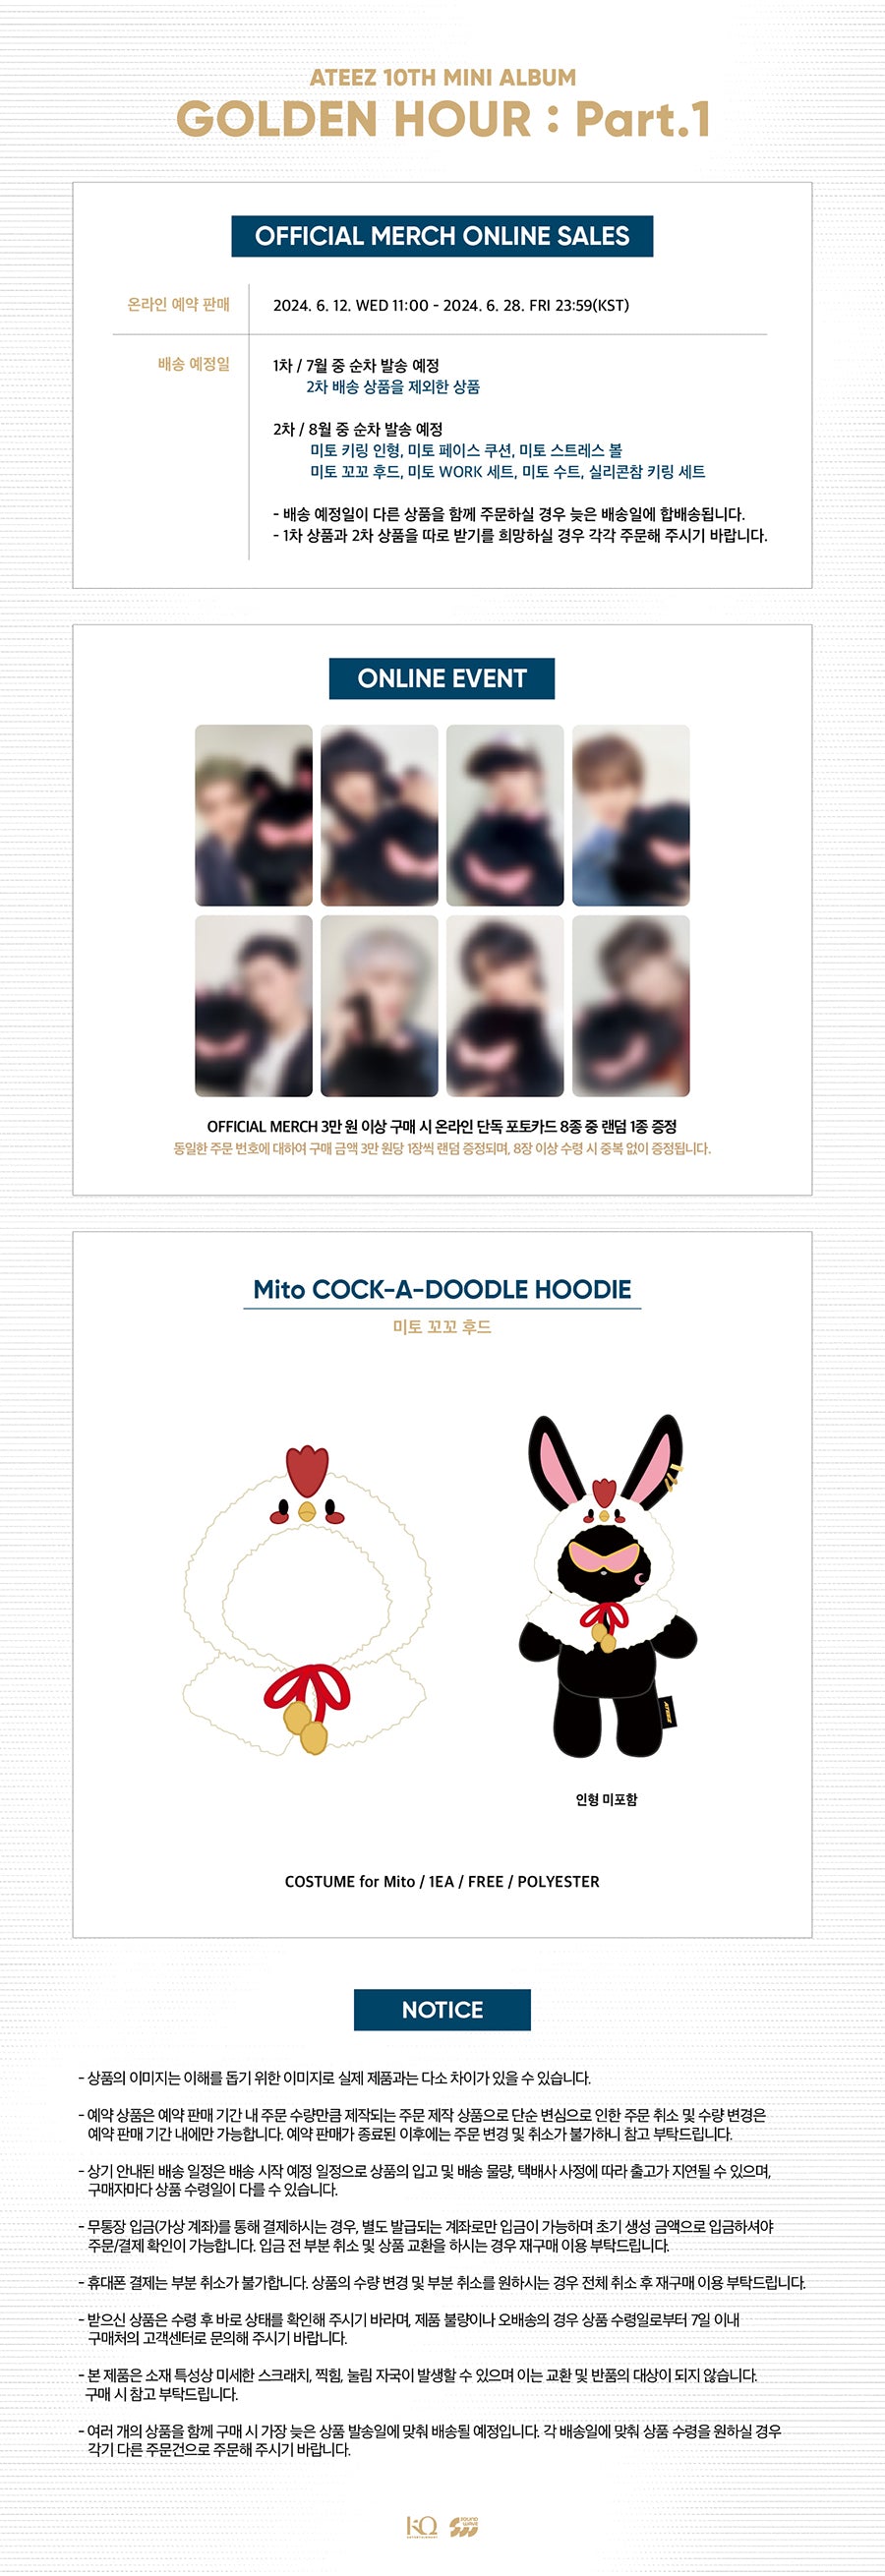 [PRE-ORDER] ATEEZ - Mito Cock-A-Doodle Hoodie [GOLDEN HOUR : Part.1 Official MD]